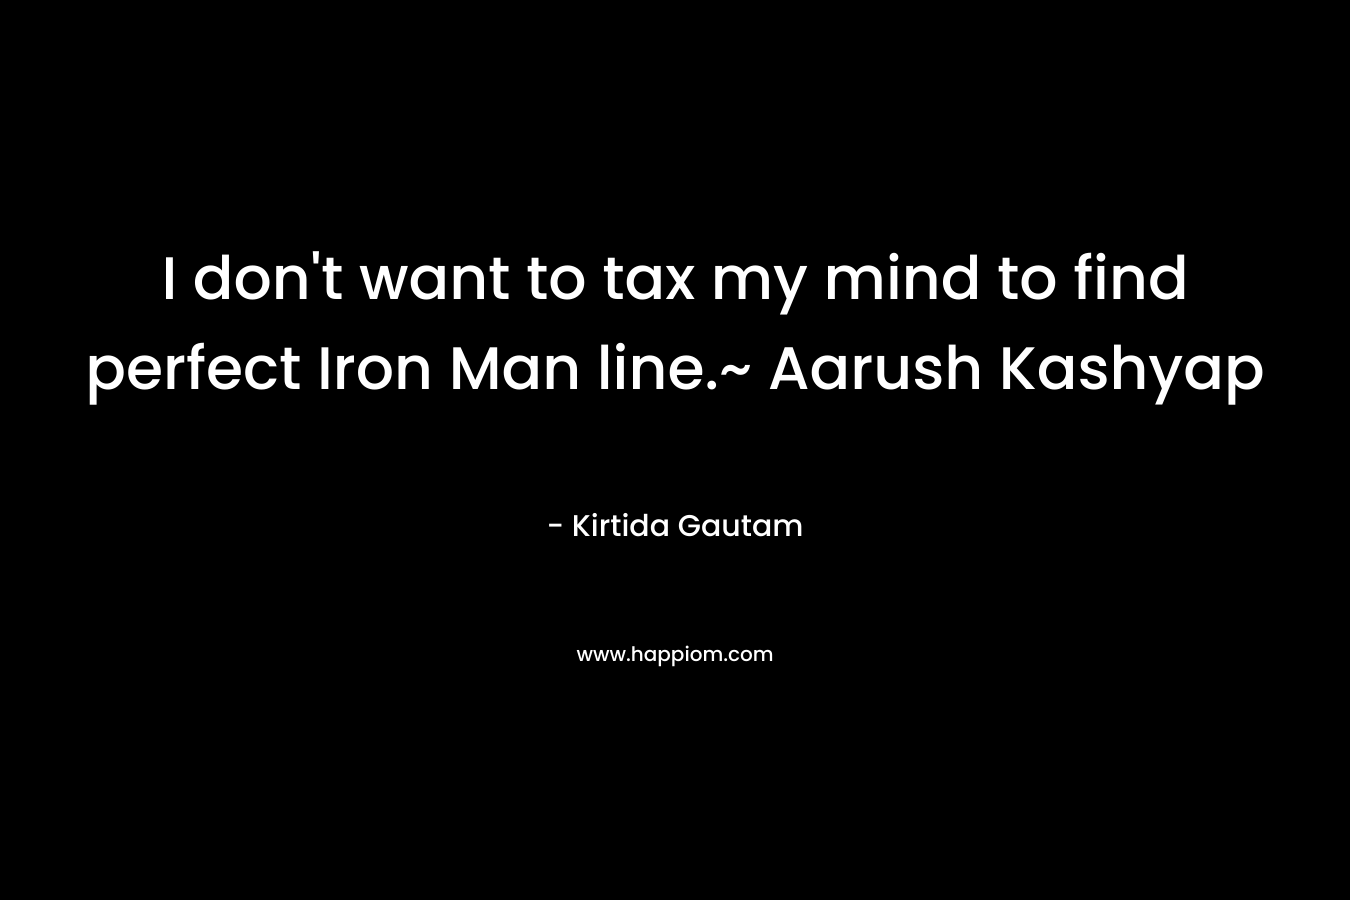 I don't want to tax my mind to find perfect Iron Man line.~ Aarush Kashyap